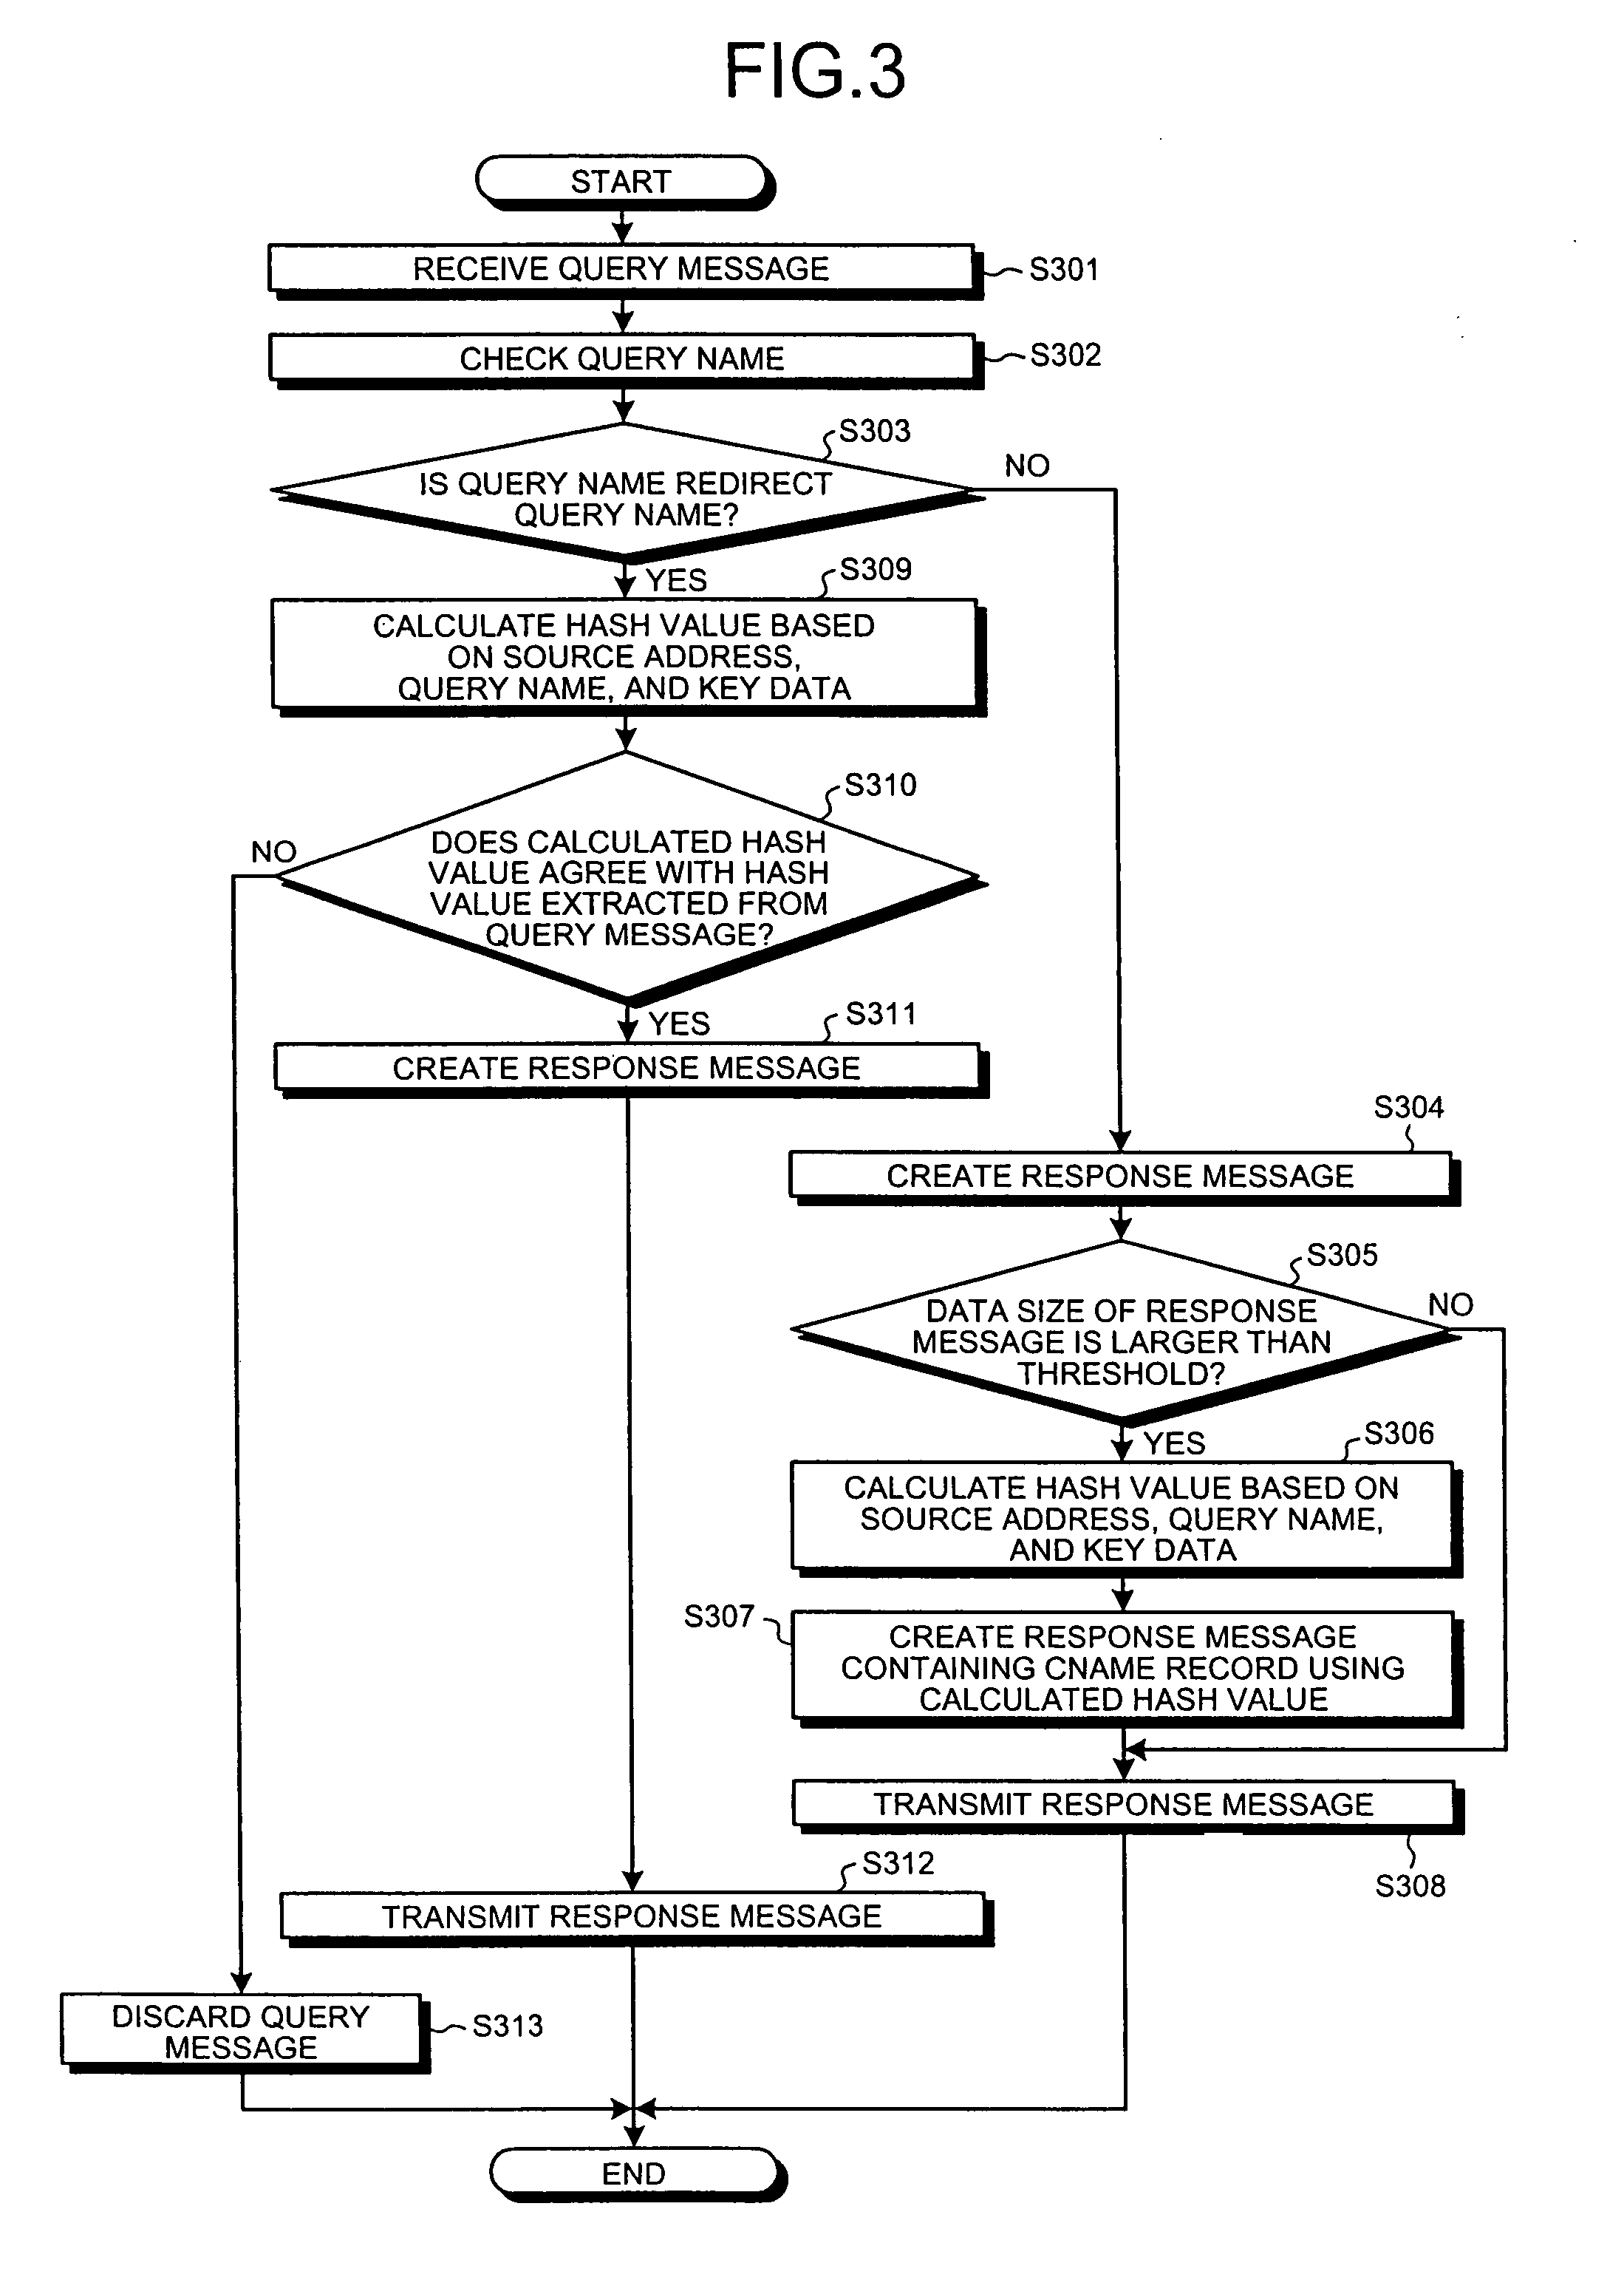 Server apparatus and method of preventing denial of service attacks, and computer program product